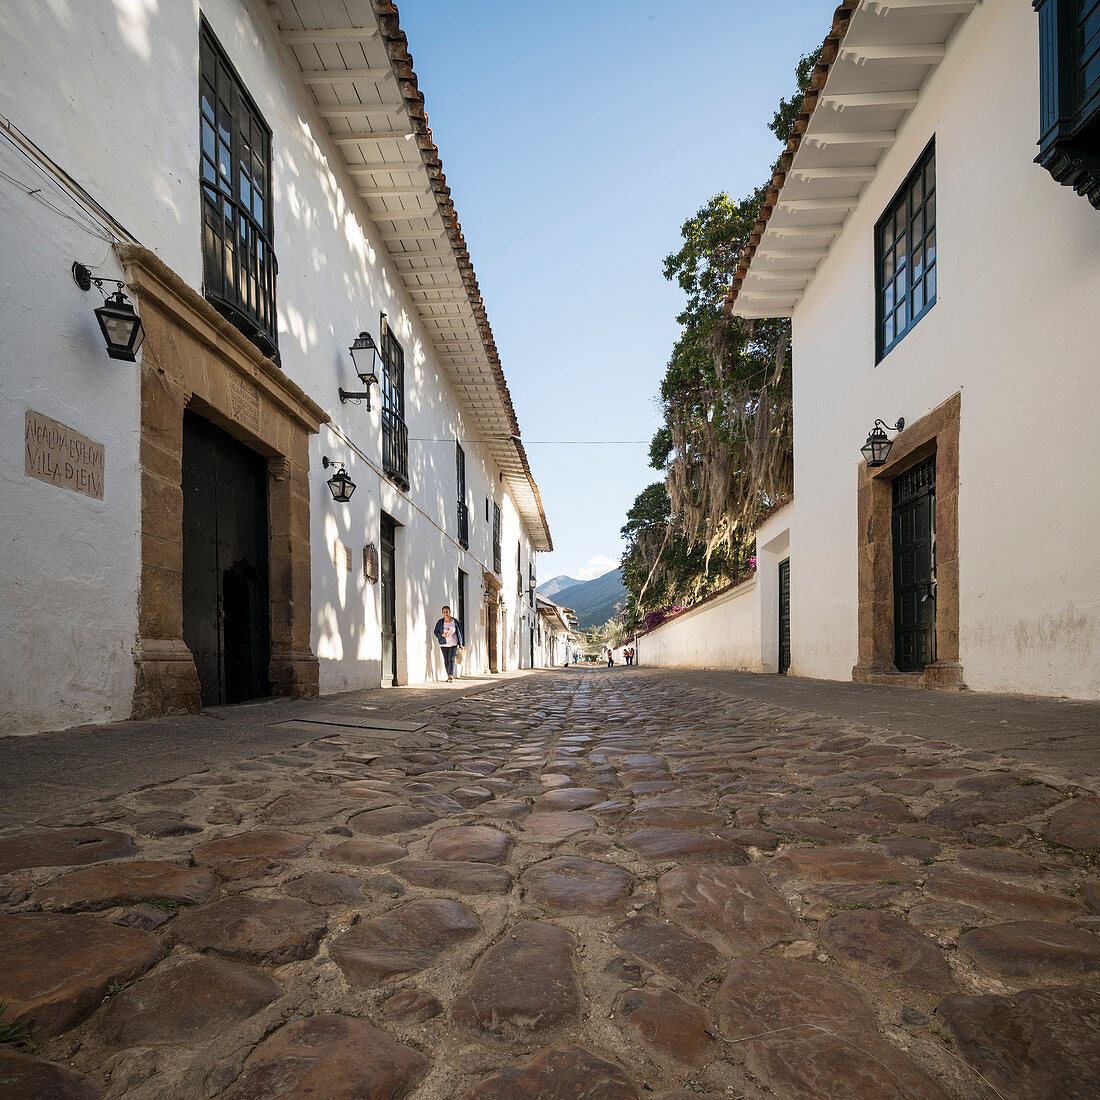 Cobbled street in Villa de Leyva, a small town with traditional colonial architecture